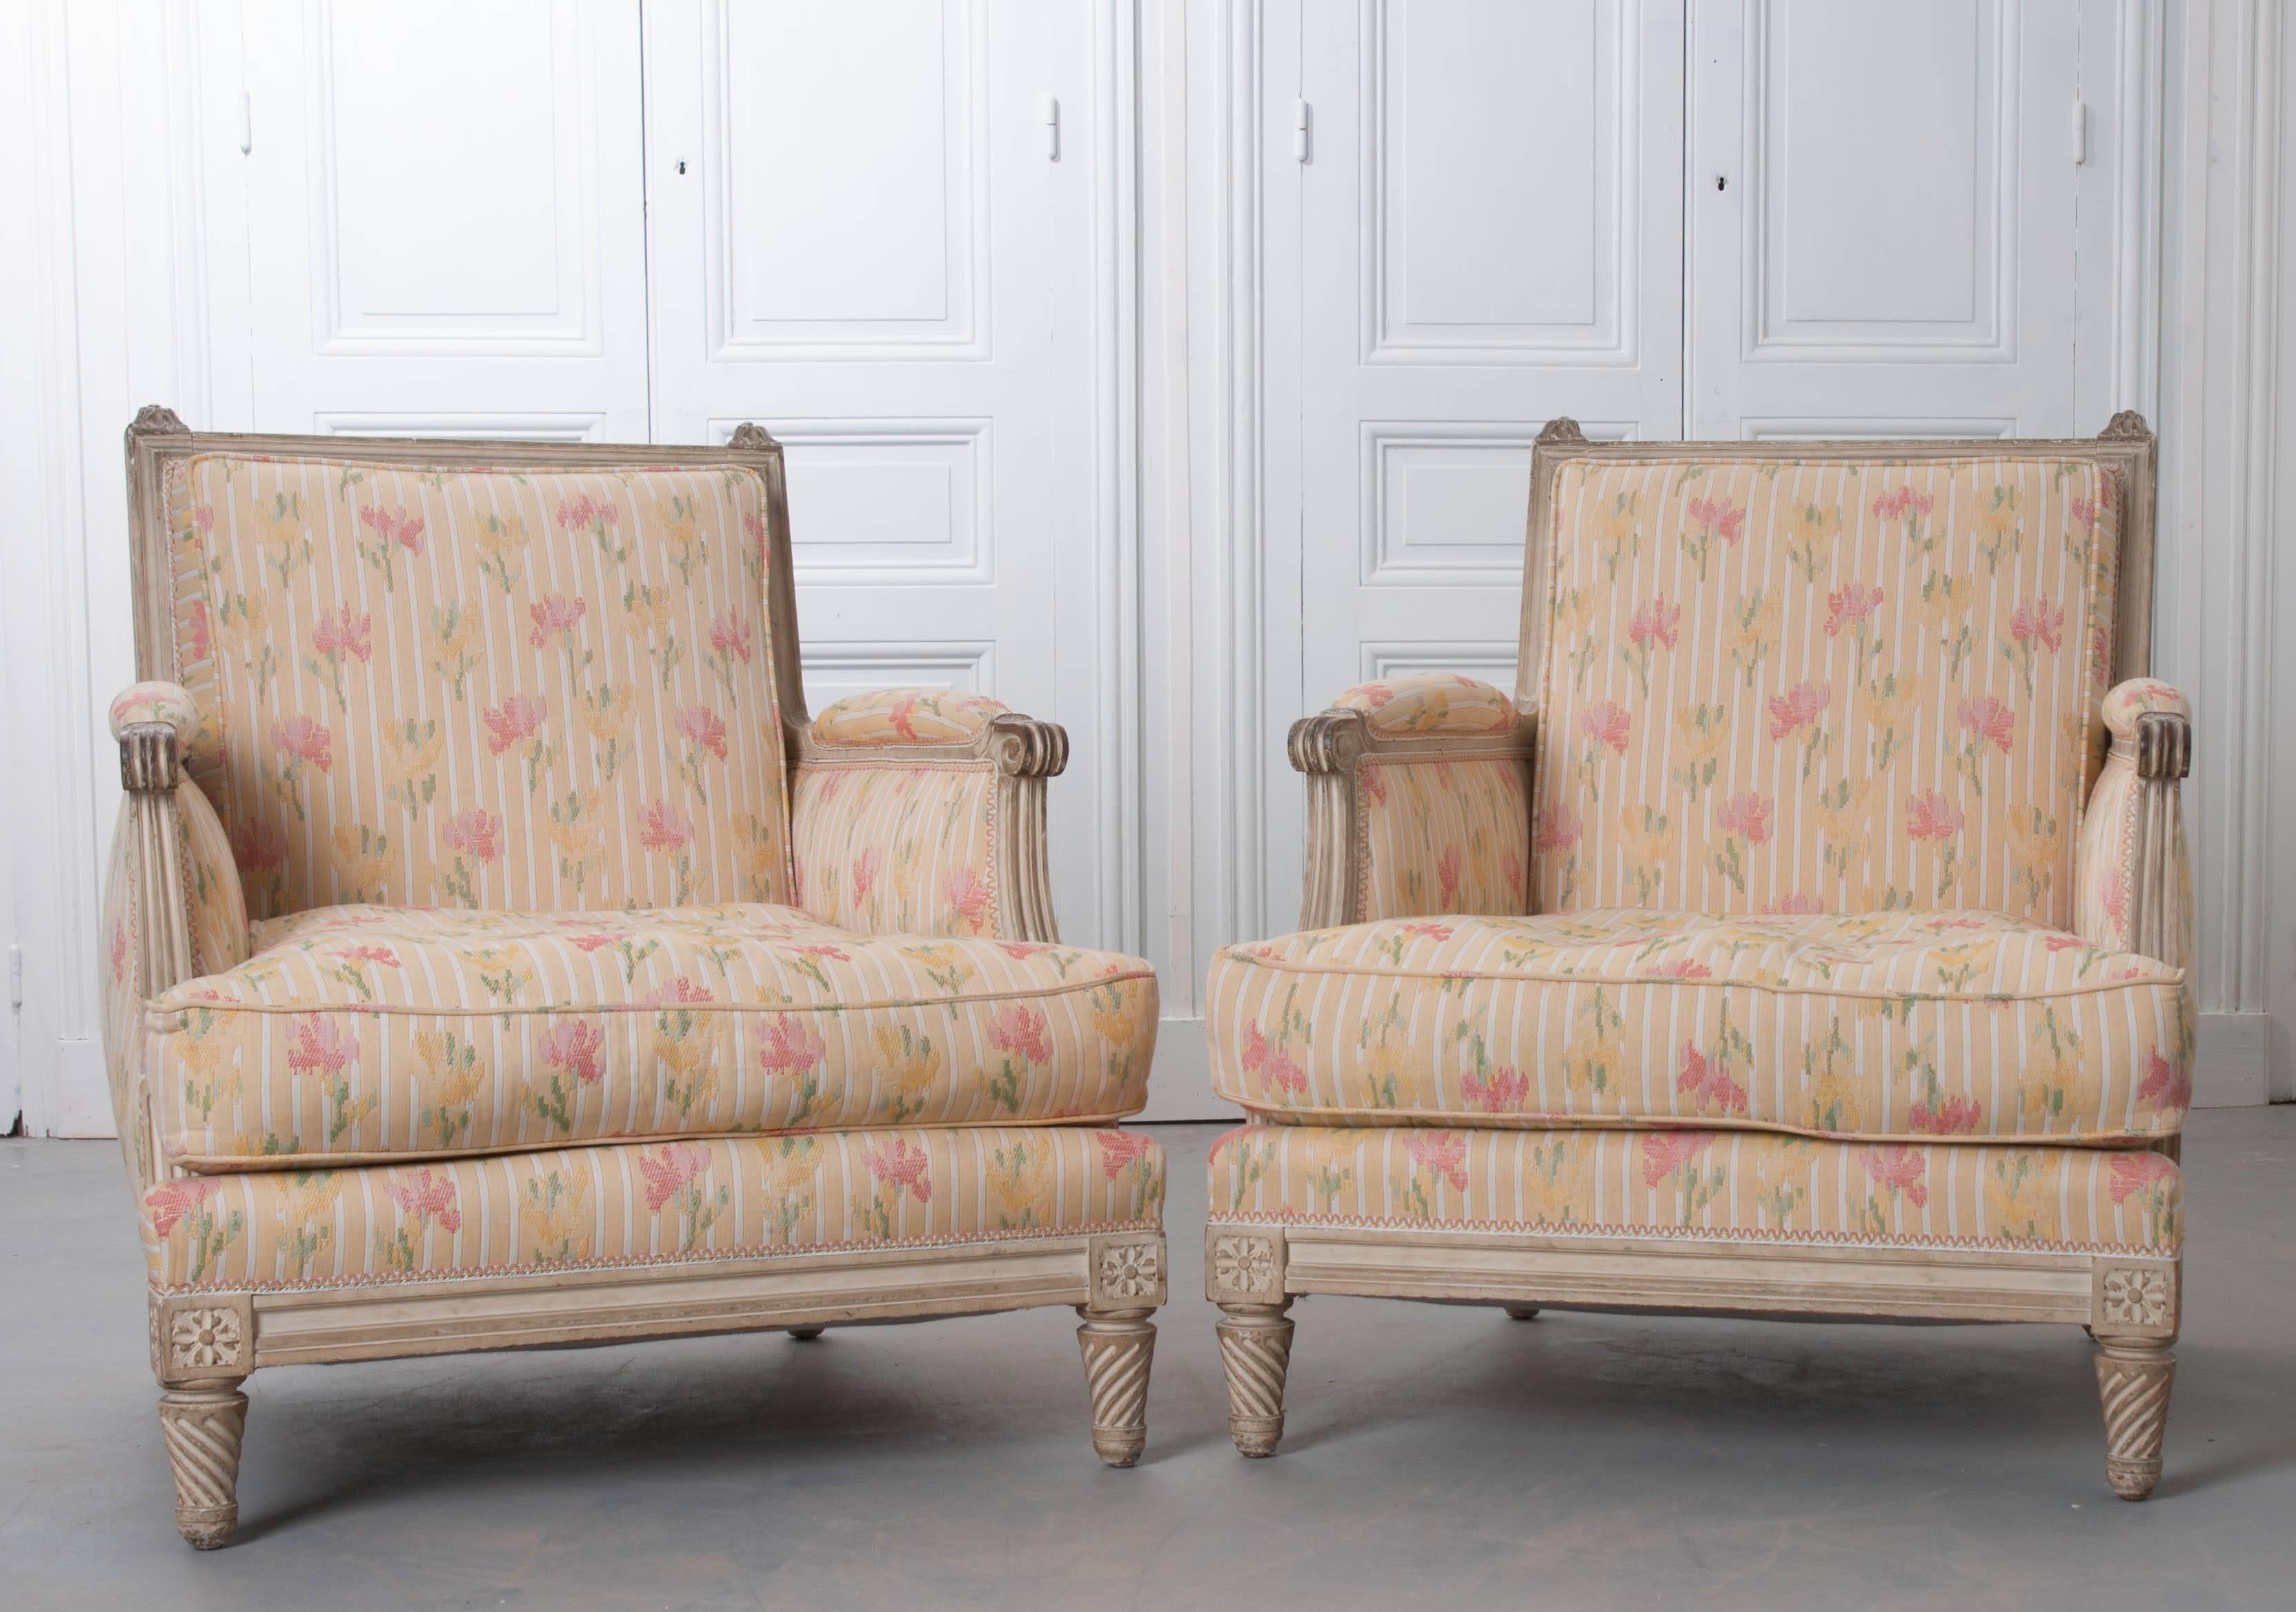 A lovely pair of French painted bergères with square backs made in the 19th century. The original paint is aged with wear and life experience. The pair of chairs sit low with squat, spiral carved feet lifting it from the ground. The frame is sturdy